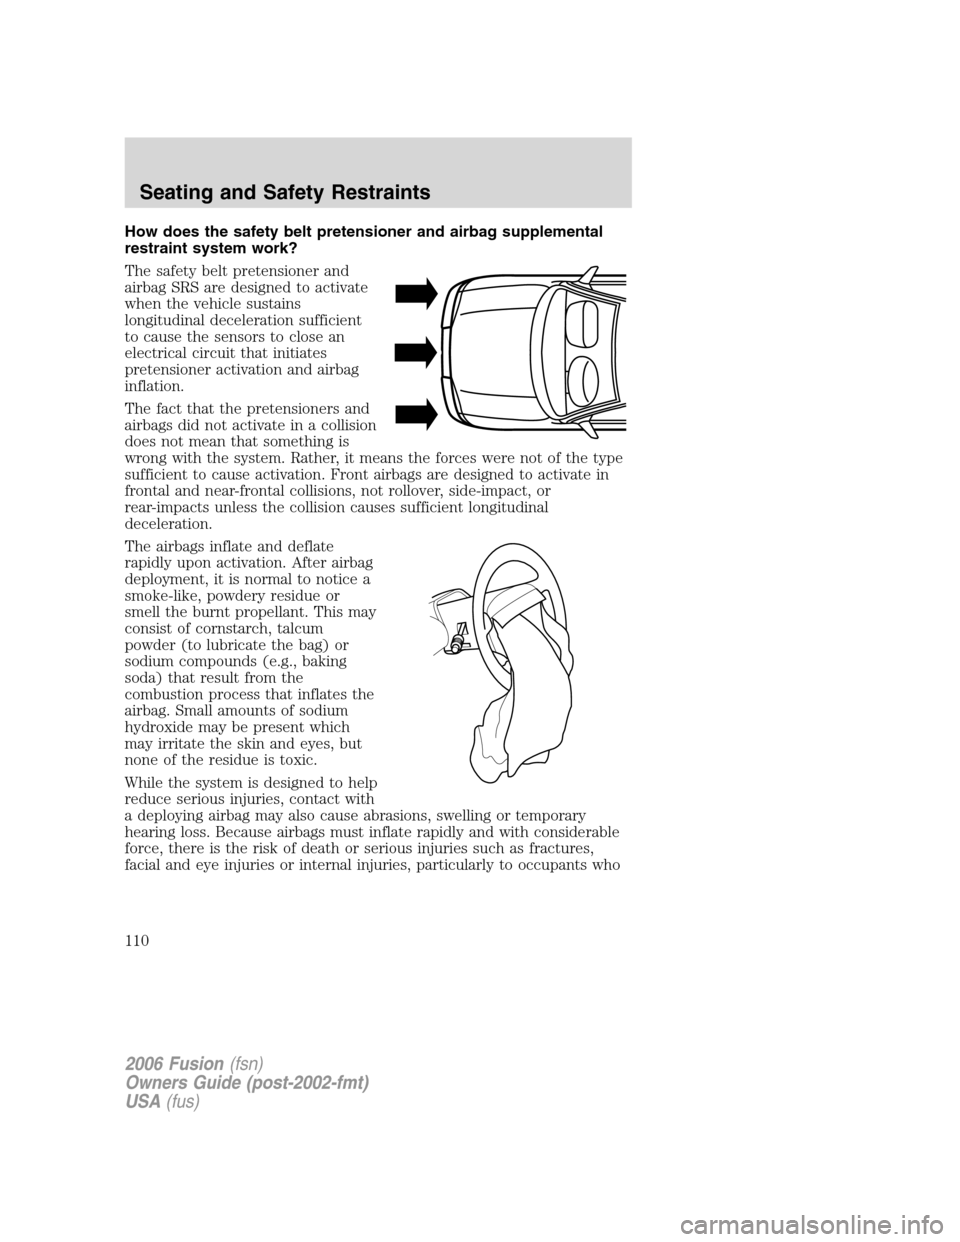 FORD FUSION (AMERICAS) 2006 1.G User Guide How does the safety belt pretensioner and airbag supplemental
restraint system work?
The safety belt pretensioner and
airbag SRS are designed to activate
when the vehicle sustains
longitudinal deceler